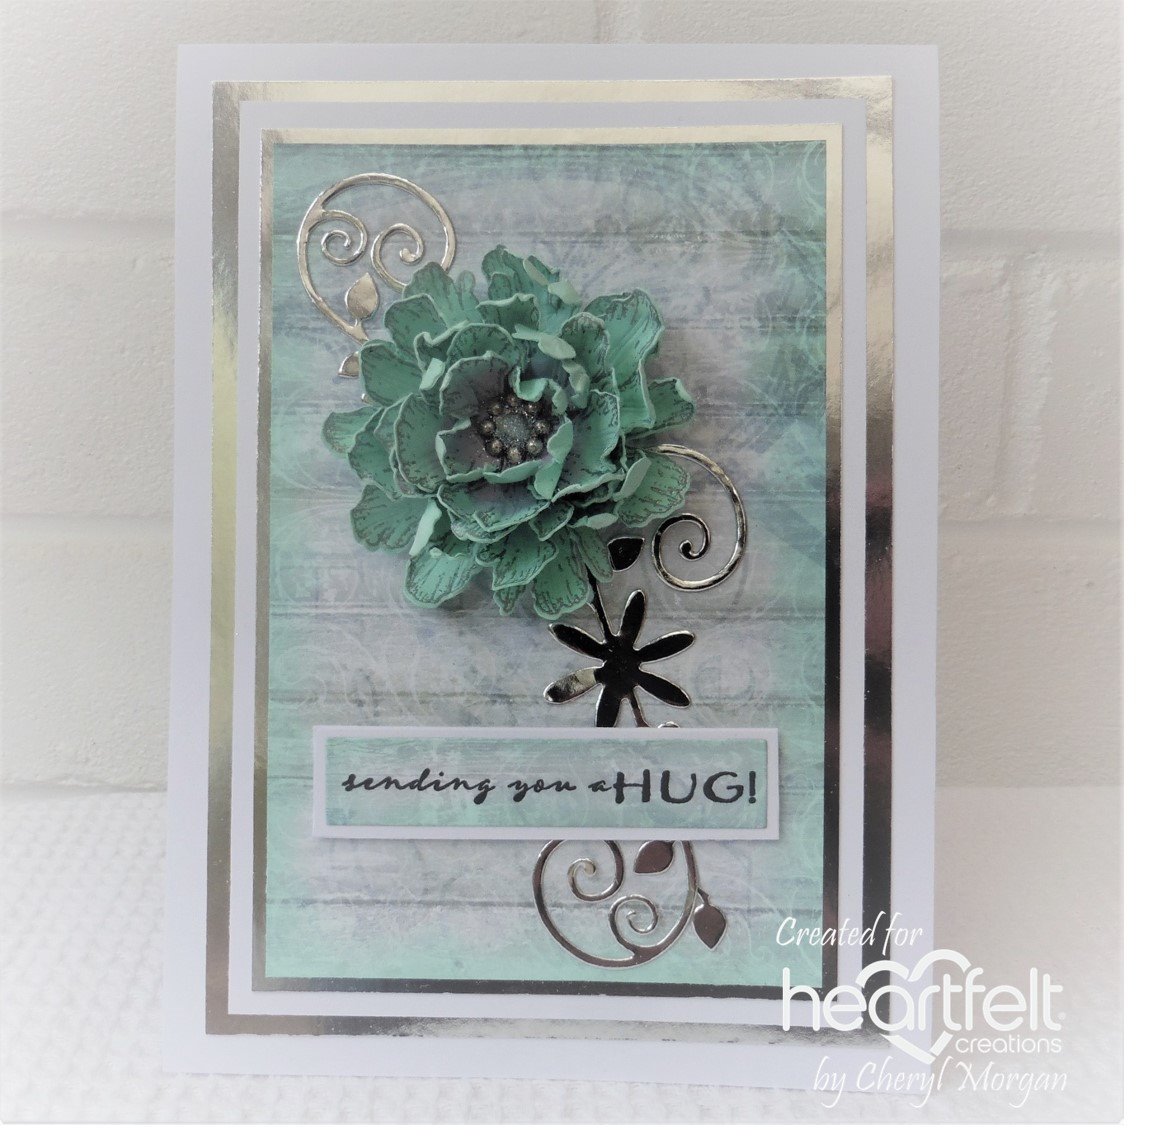 Inspiration #wednesday at #HeartfeltCreations, this is my #sweetpeony hug #card